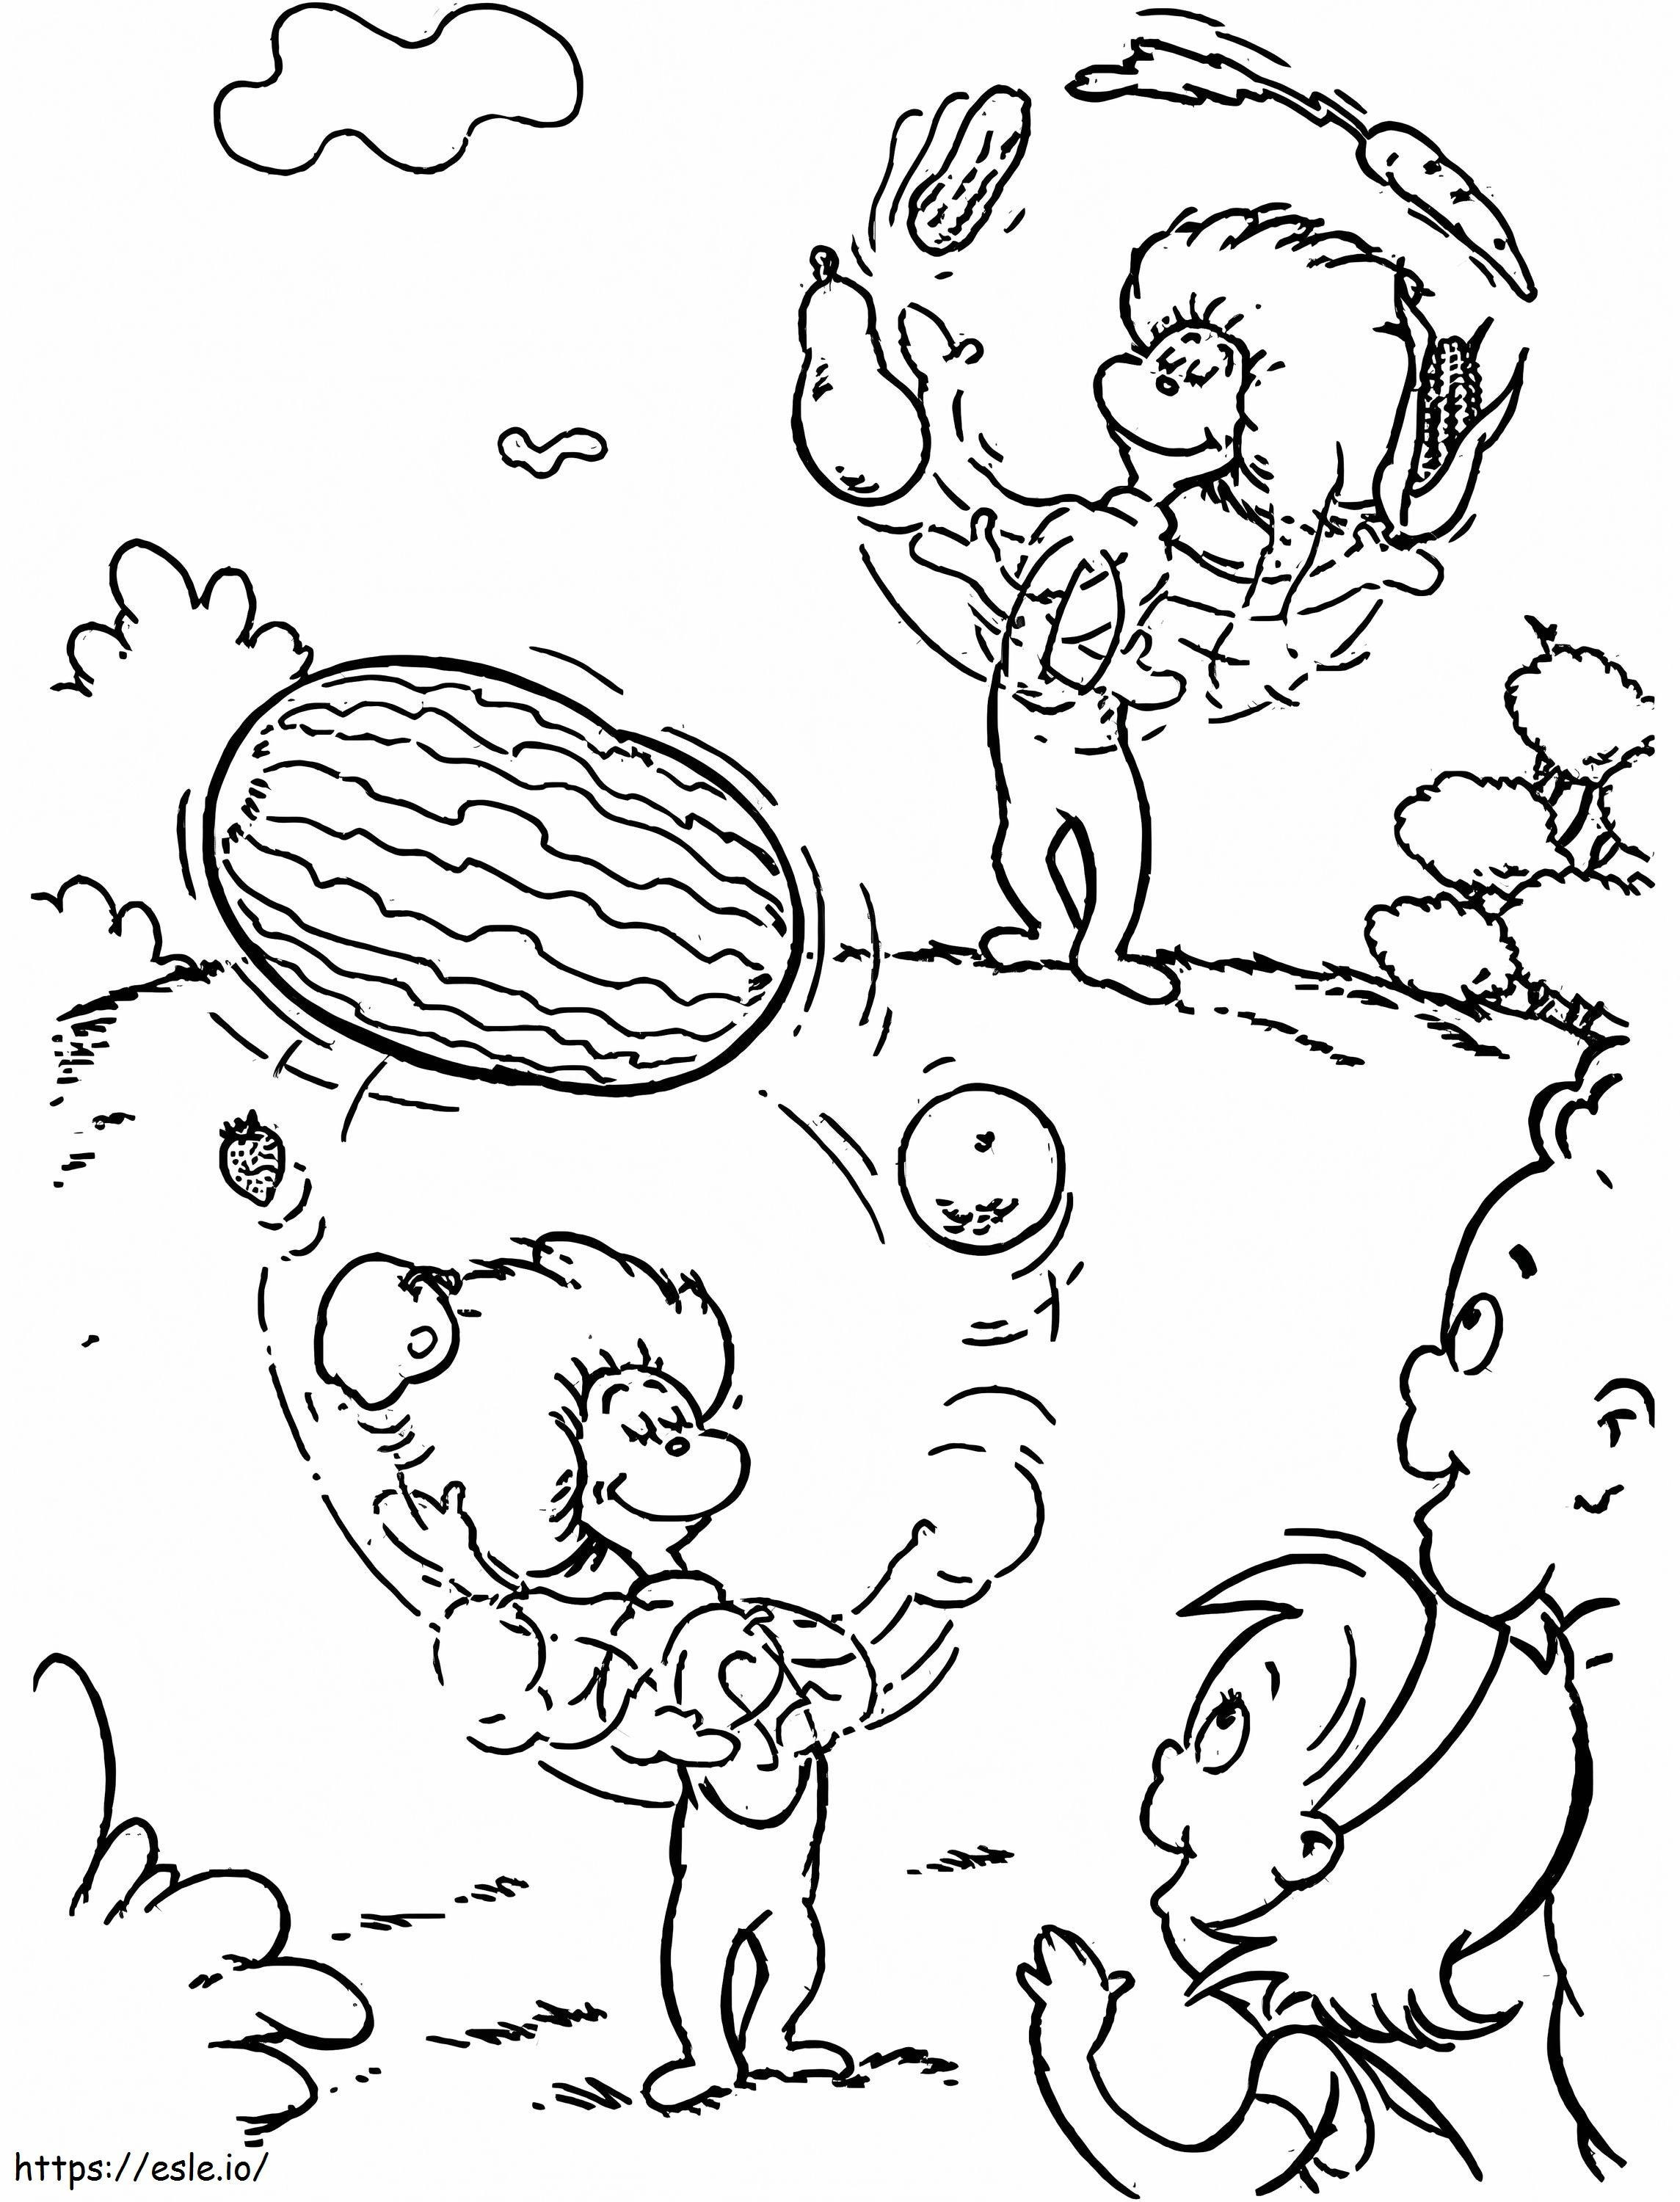 Thing 1 N Thing 2 Playing With Fruits A4 coloring page